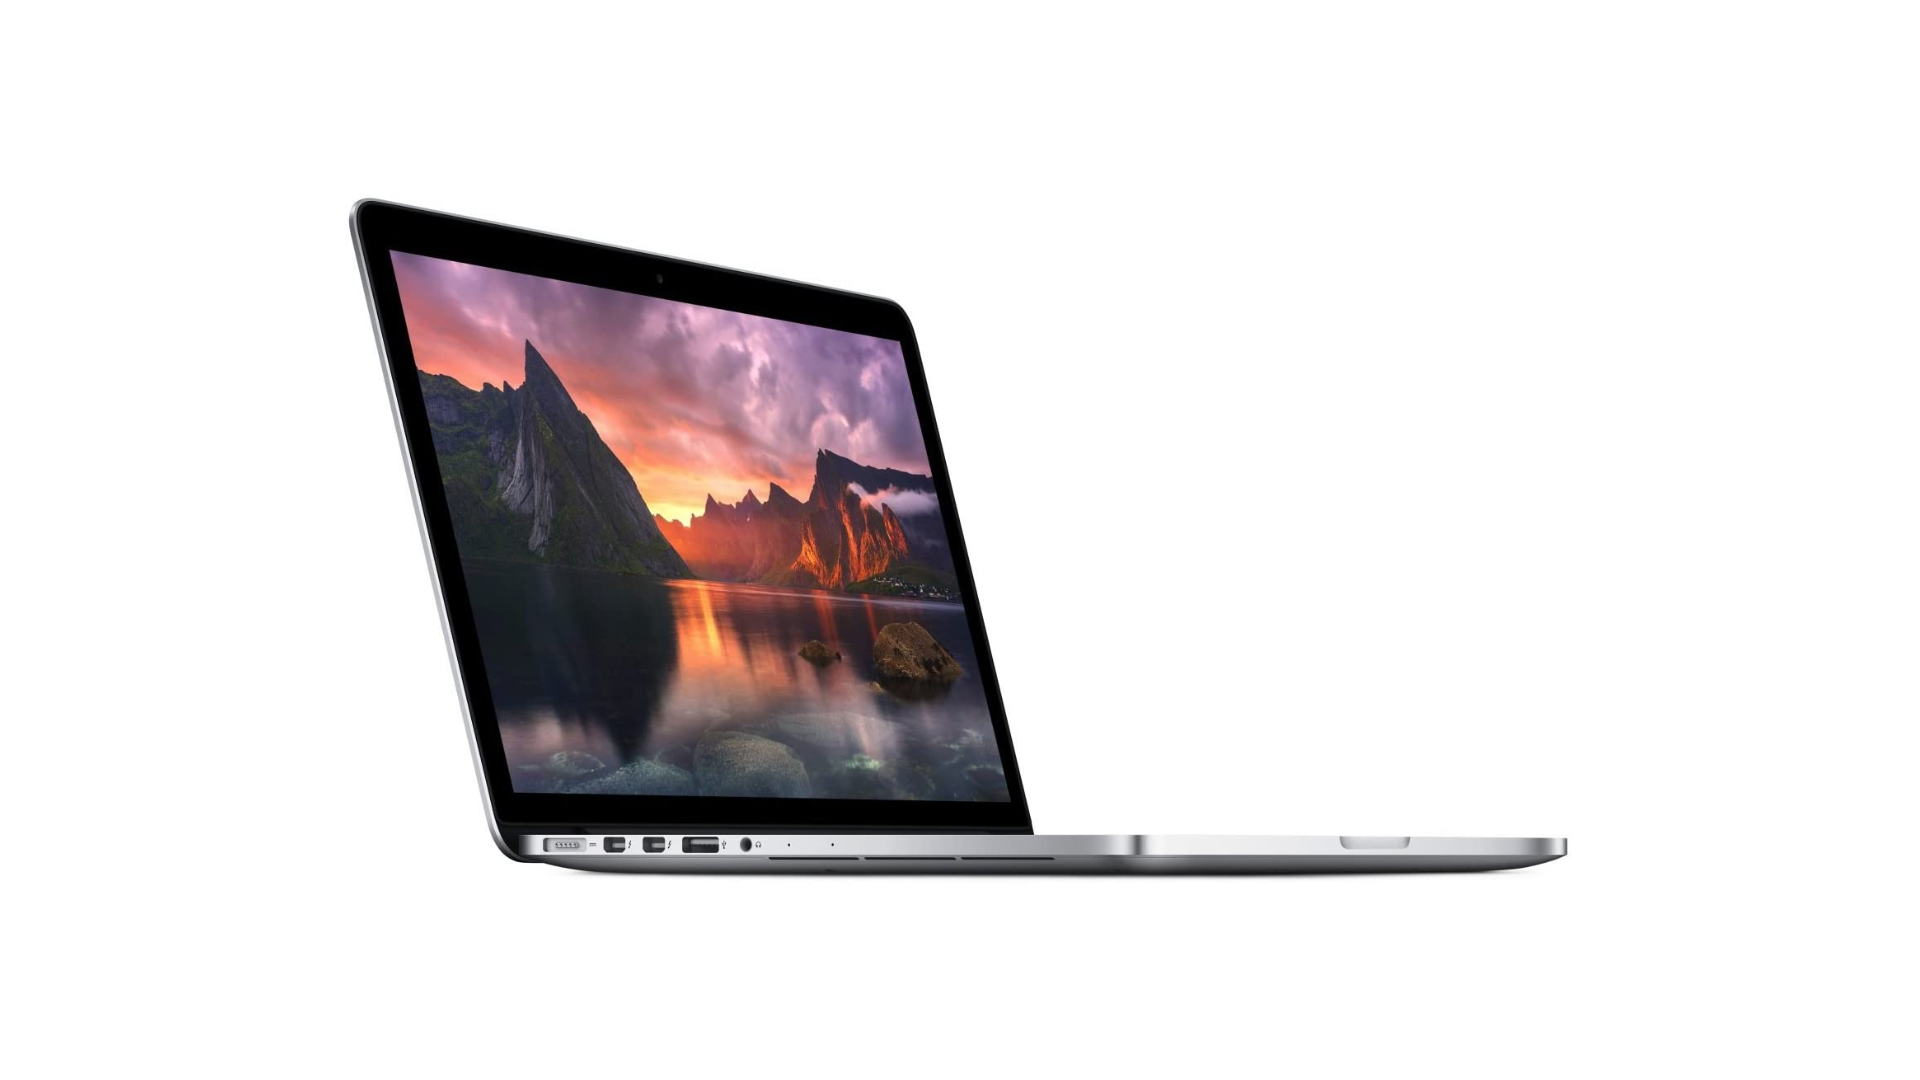 what is the last system update for mac book pro late 2013